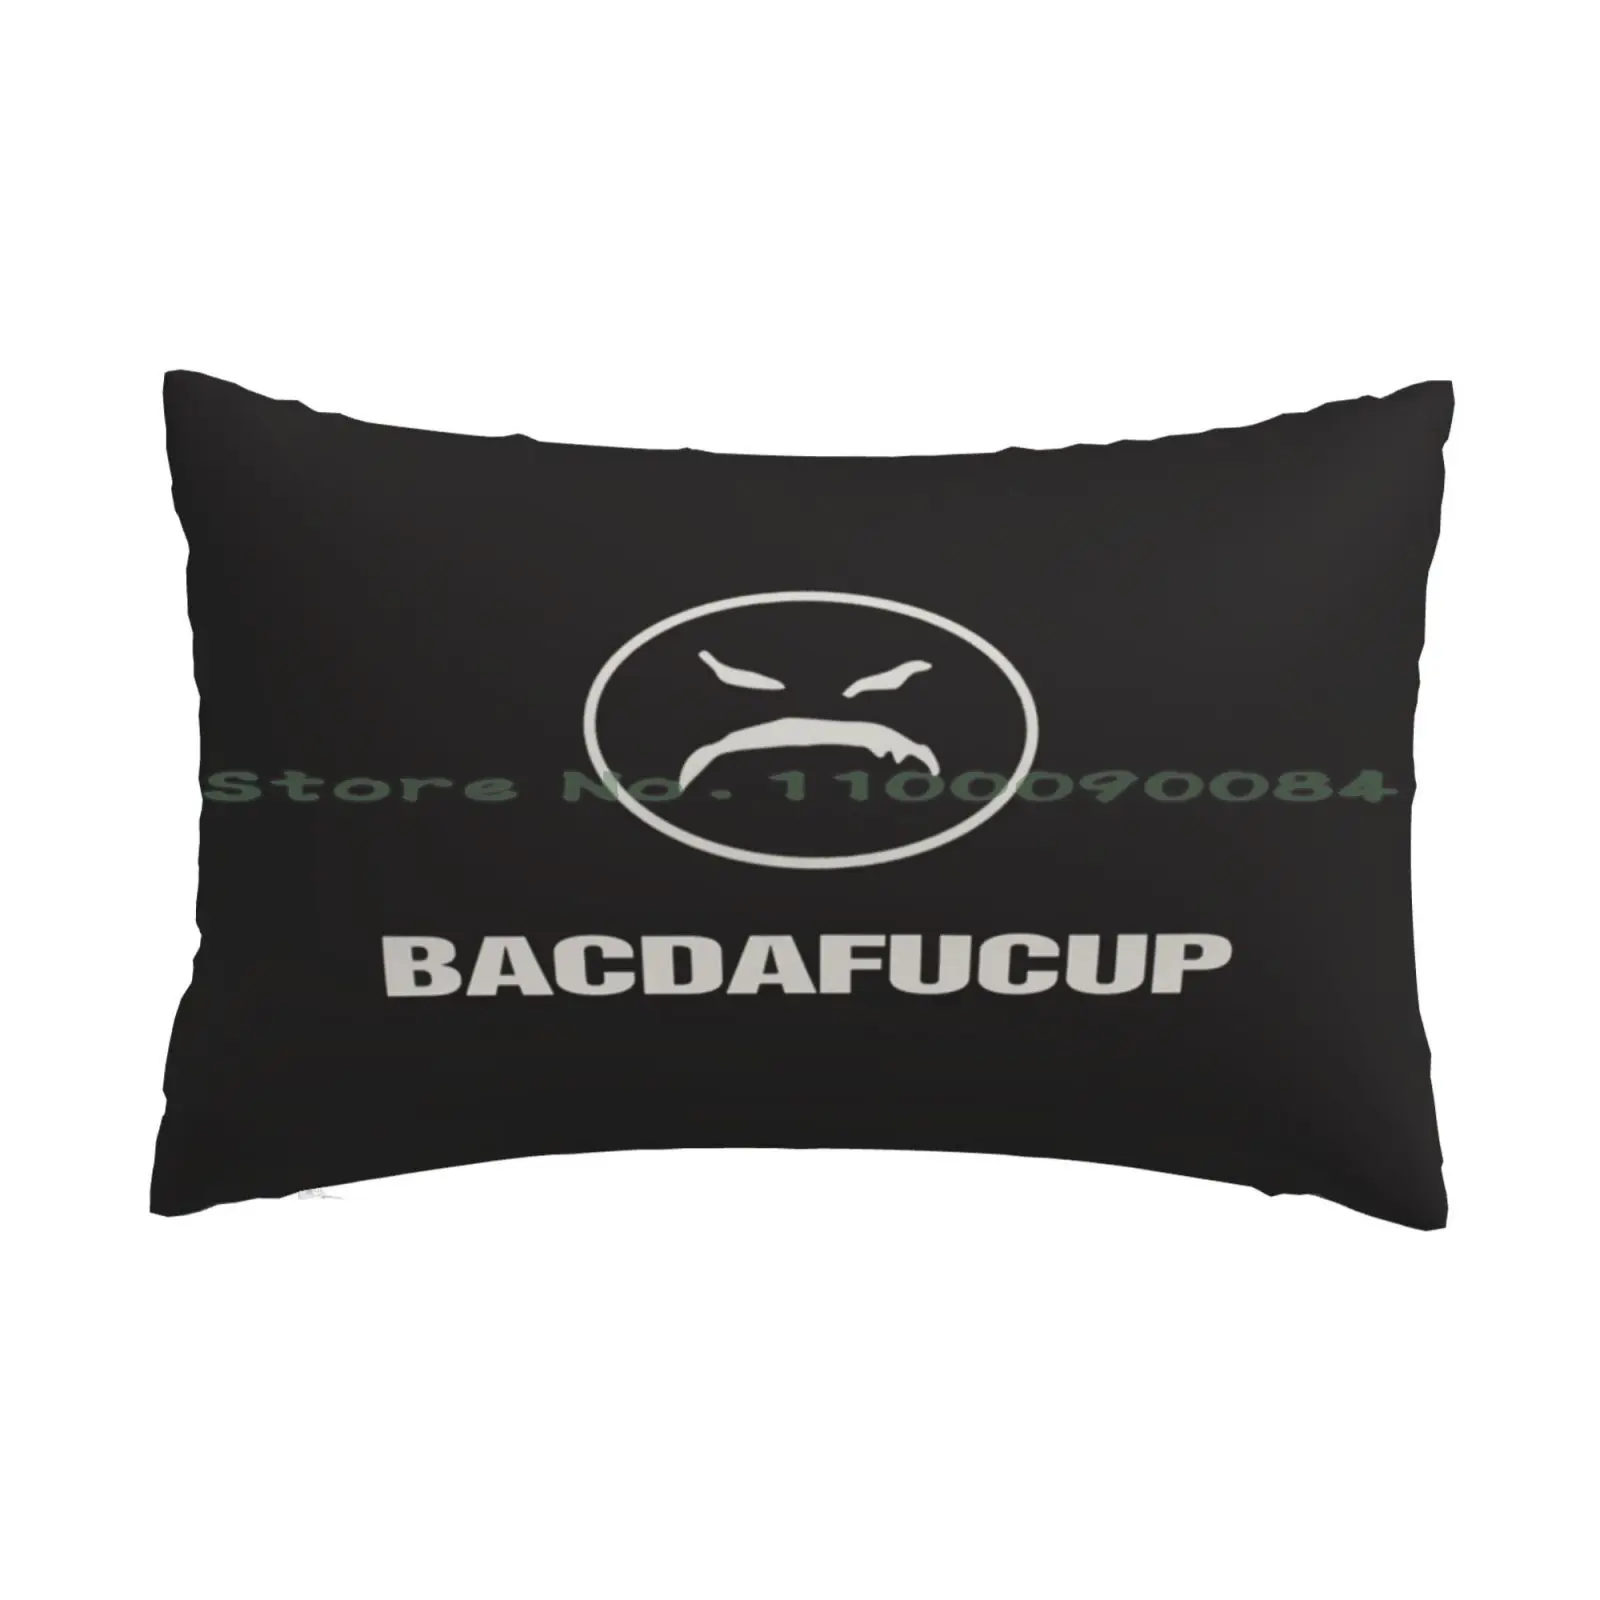 

Bacdafucup Pillow Case 20x30 50*75 Sofa Bedroom Draumrart Smile Creepy Face Mask Goth Metal Macabre Black White Death S Head